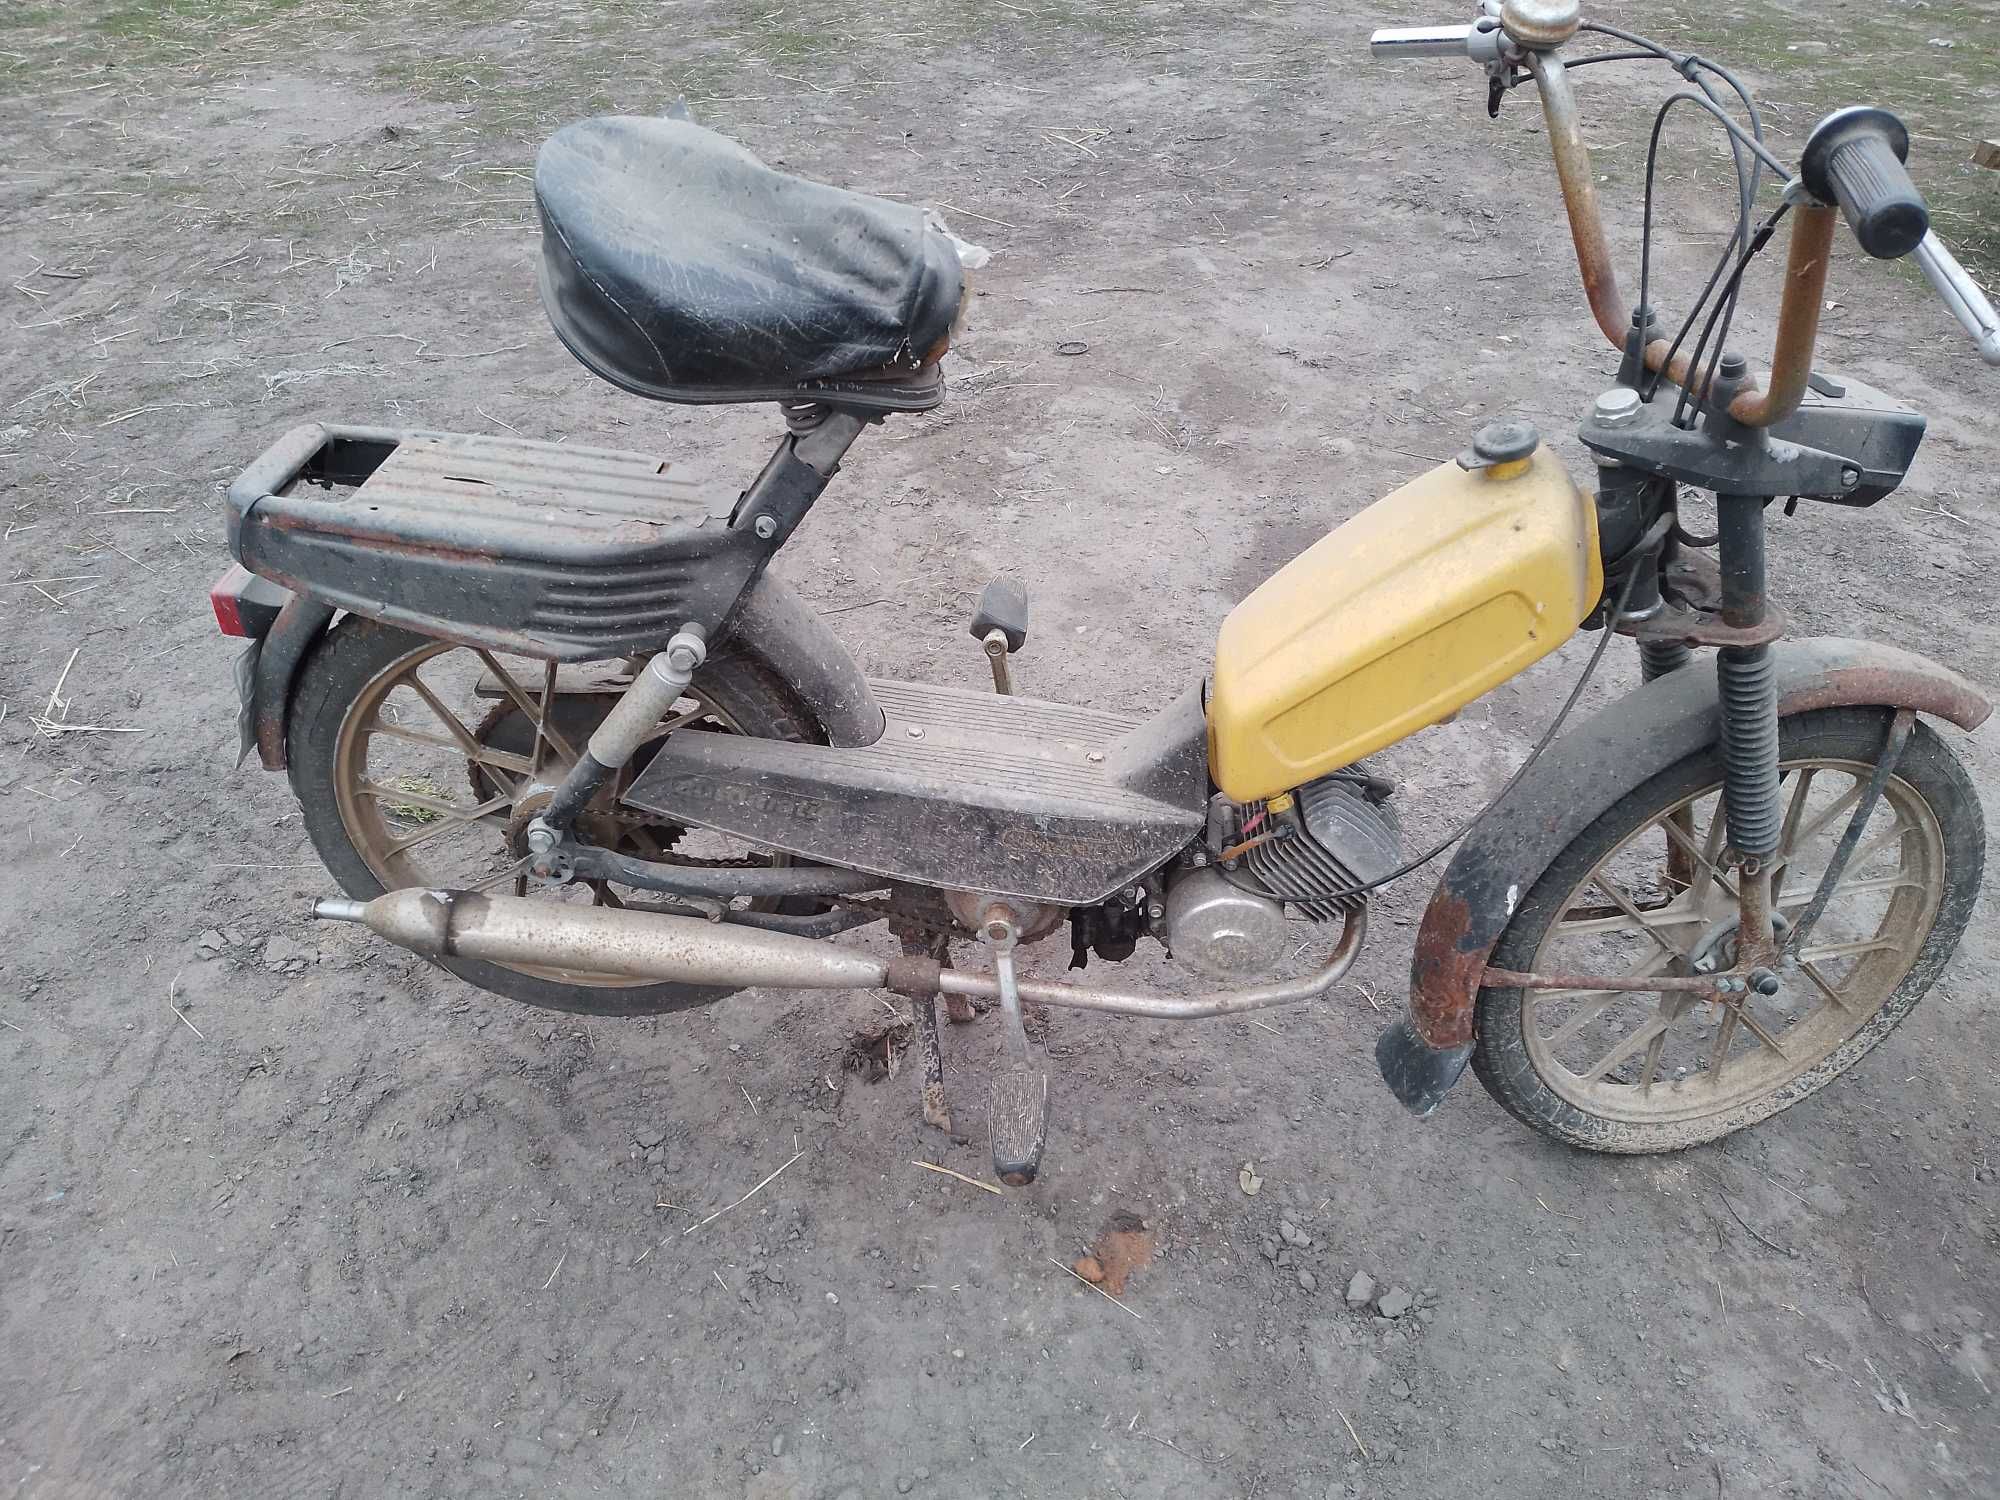 1990 Simson puch solo automatic romet na pedały